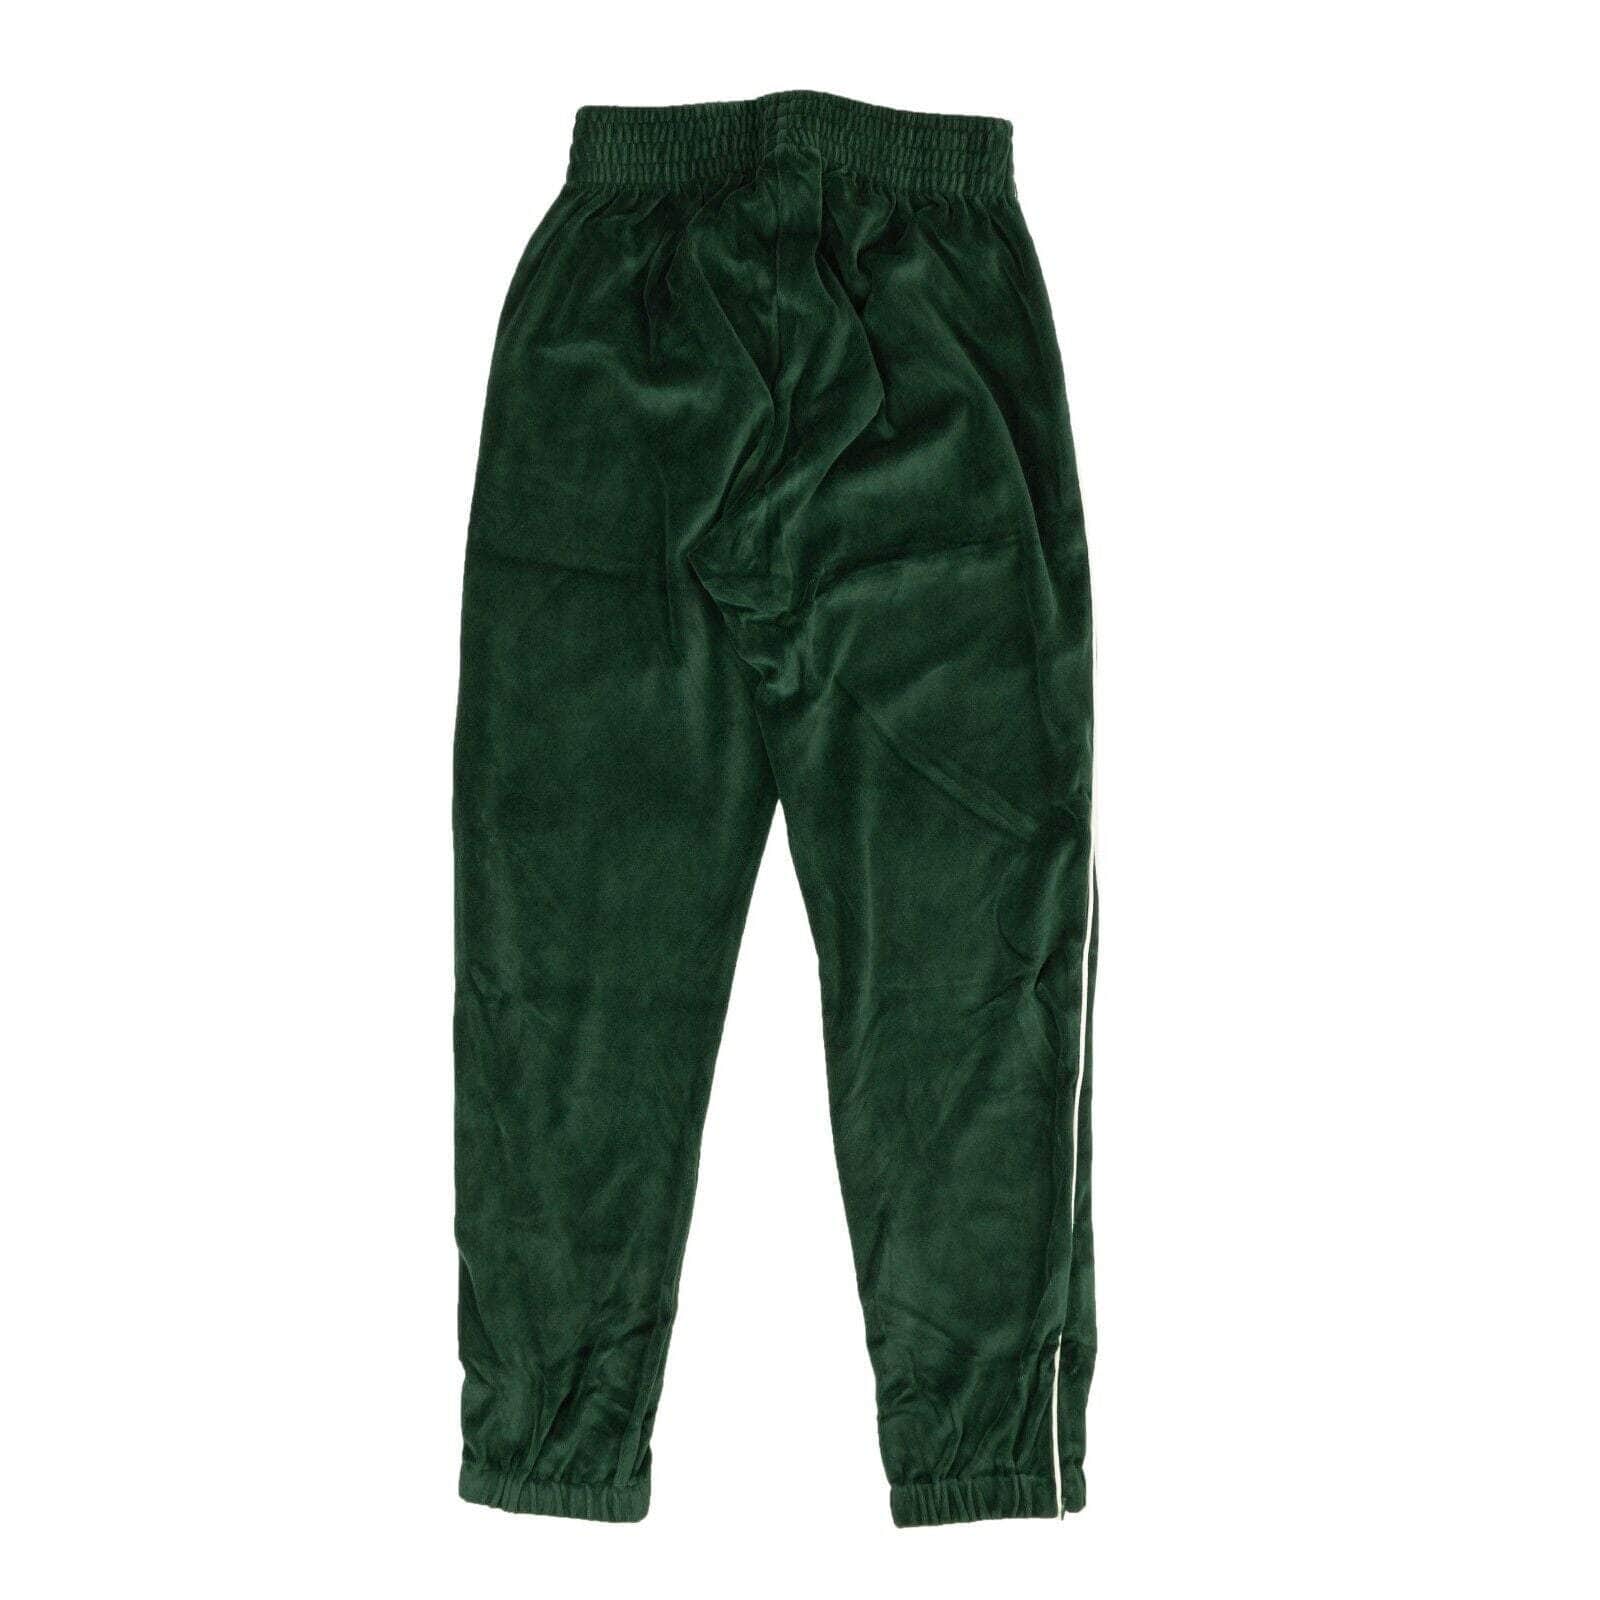 Visitor on Earth channelenable-all, chicmi, couponcollection, gender-mens, main-clothing, mens-joggers-sweatpants, mens-shoes, size-l, size-m, size-s, size-xl, size-xs, under-250, visitor-on-earth Green Velour Logo Sweatpants